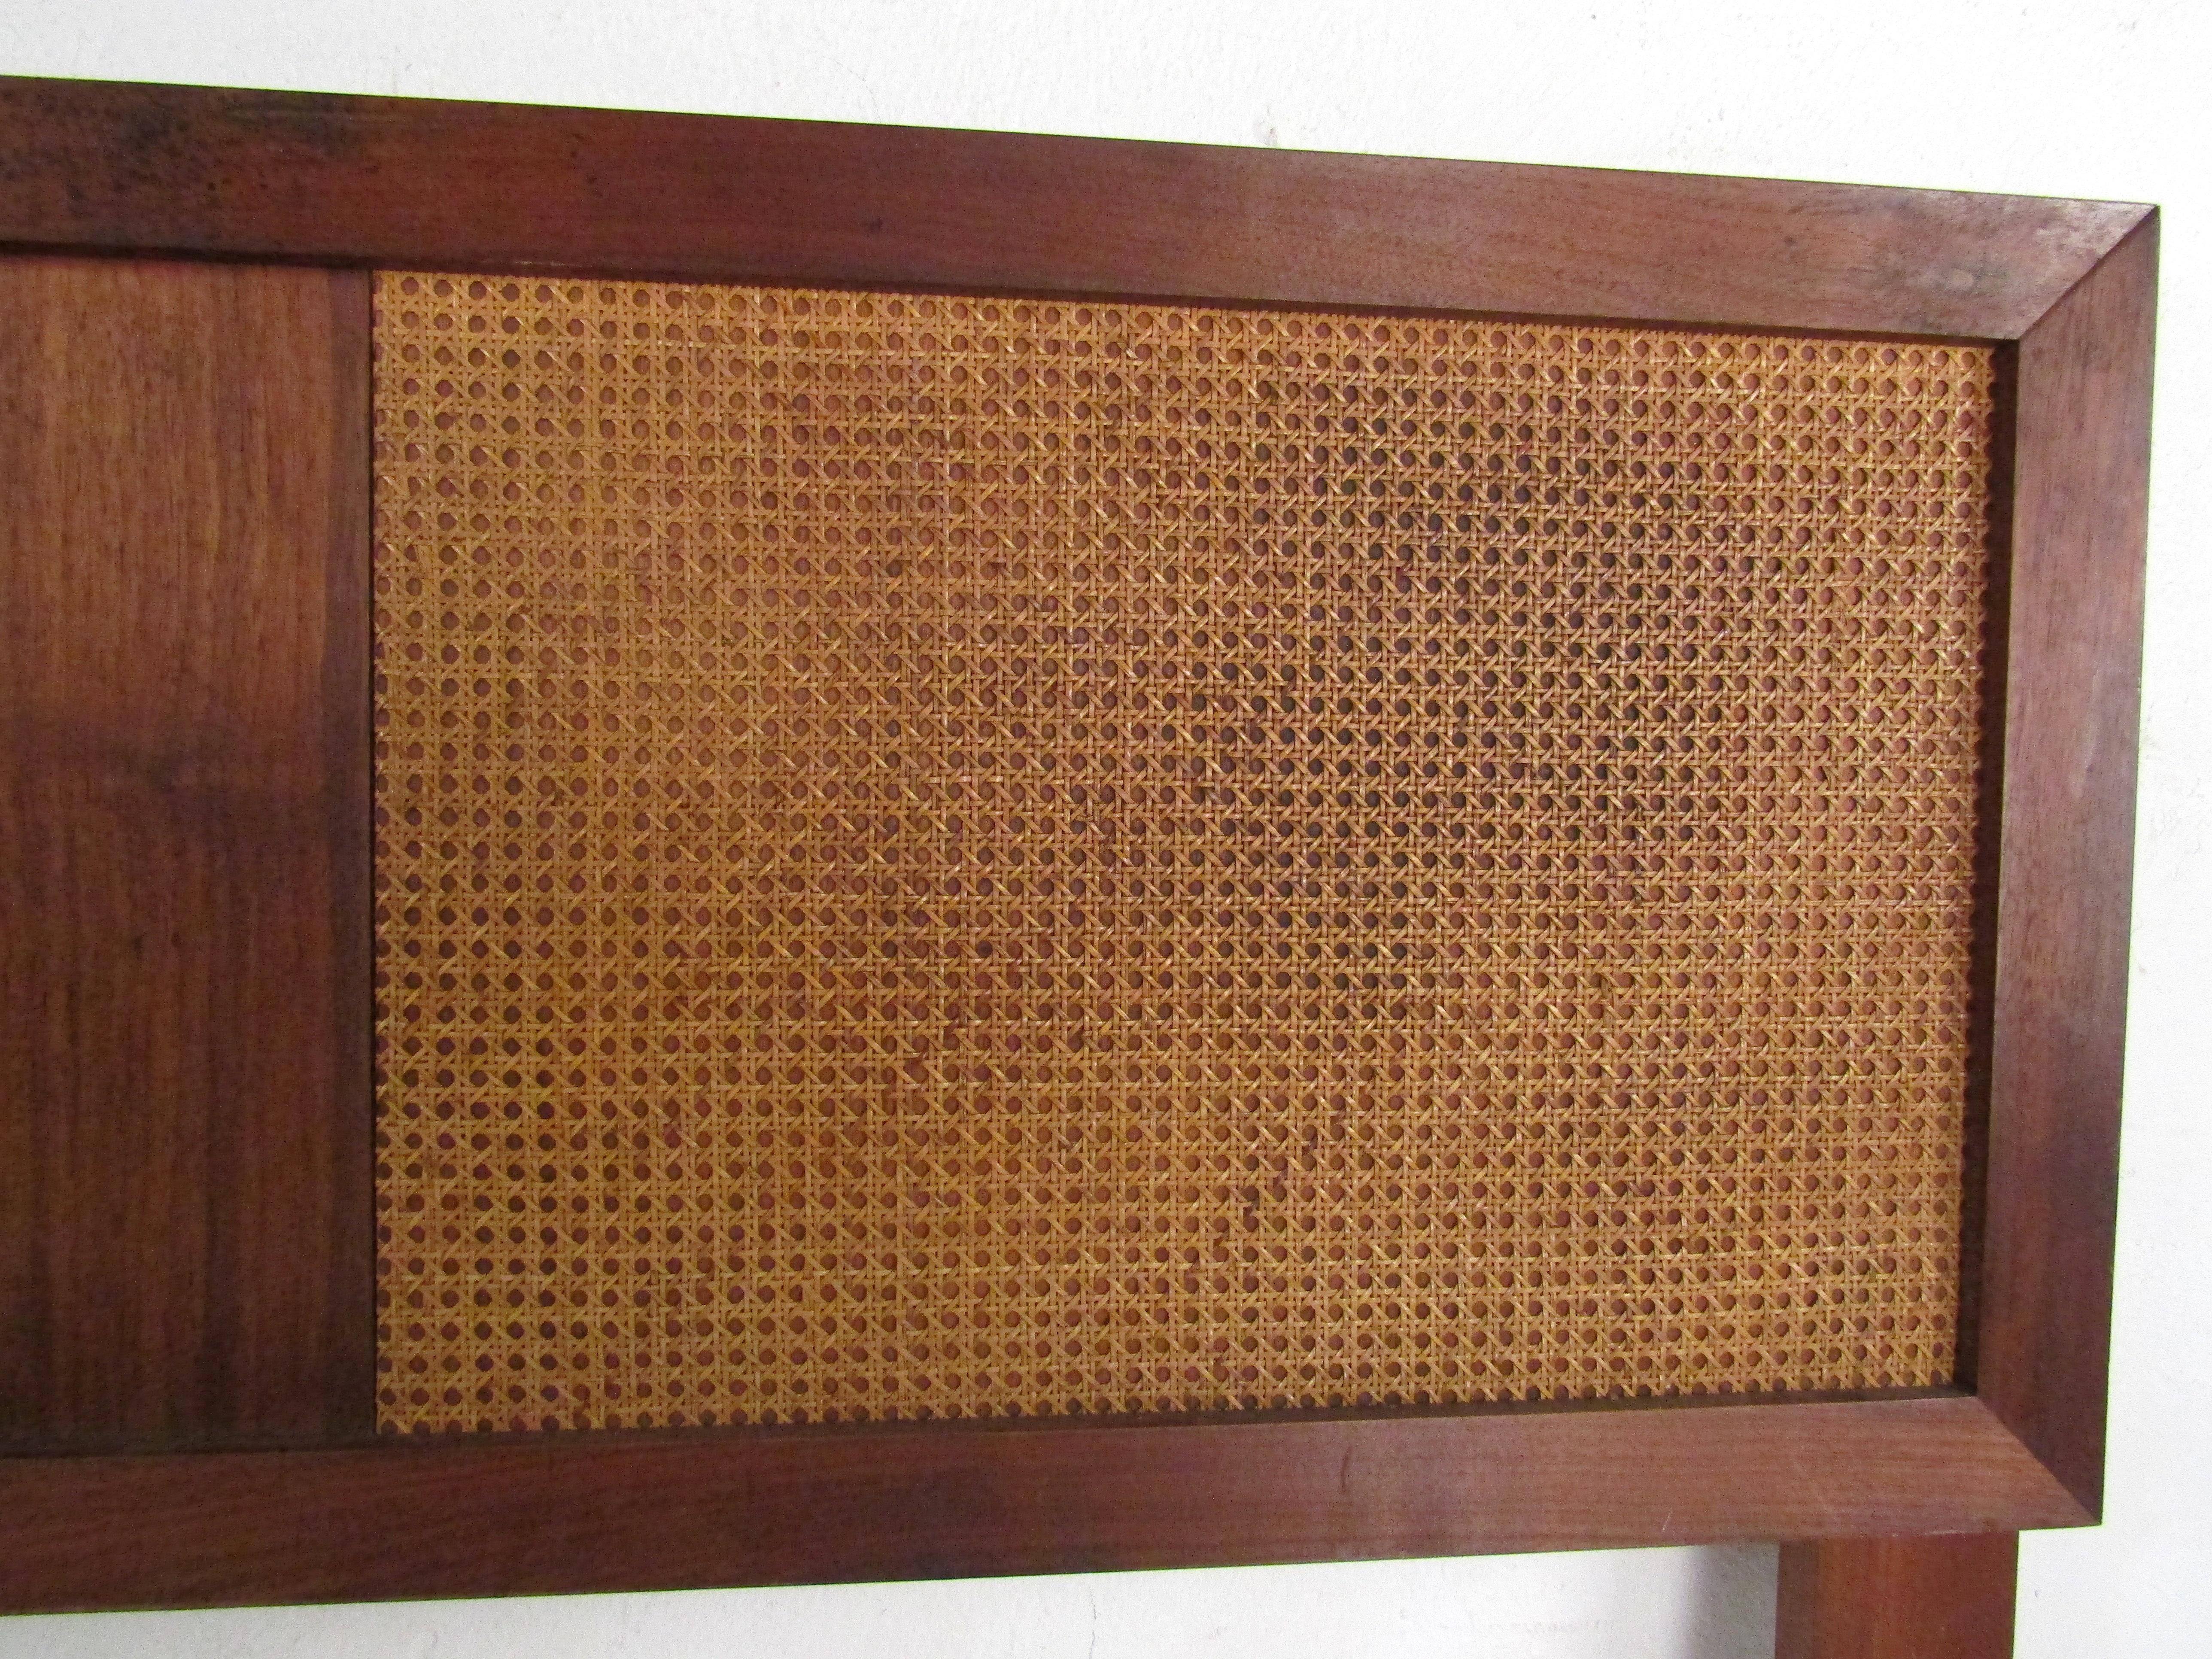 20th Century Mid-Century Modern Headboard with Cane Accents